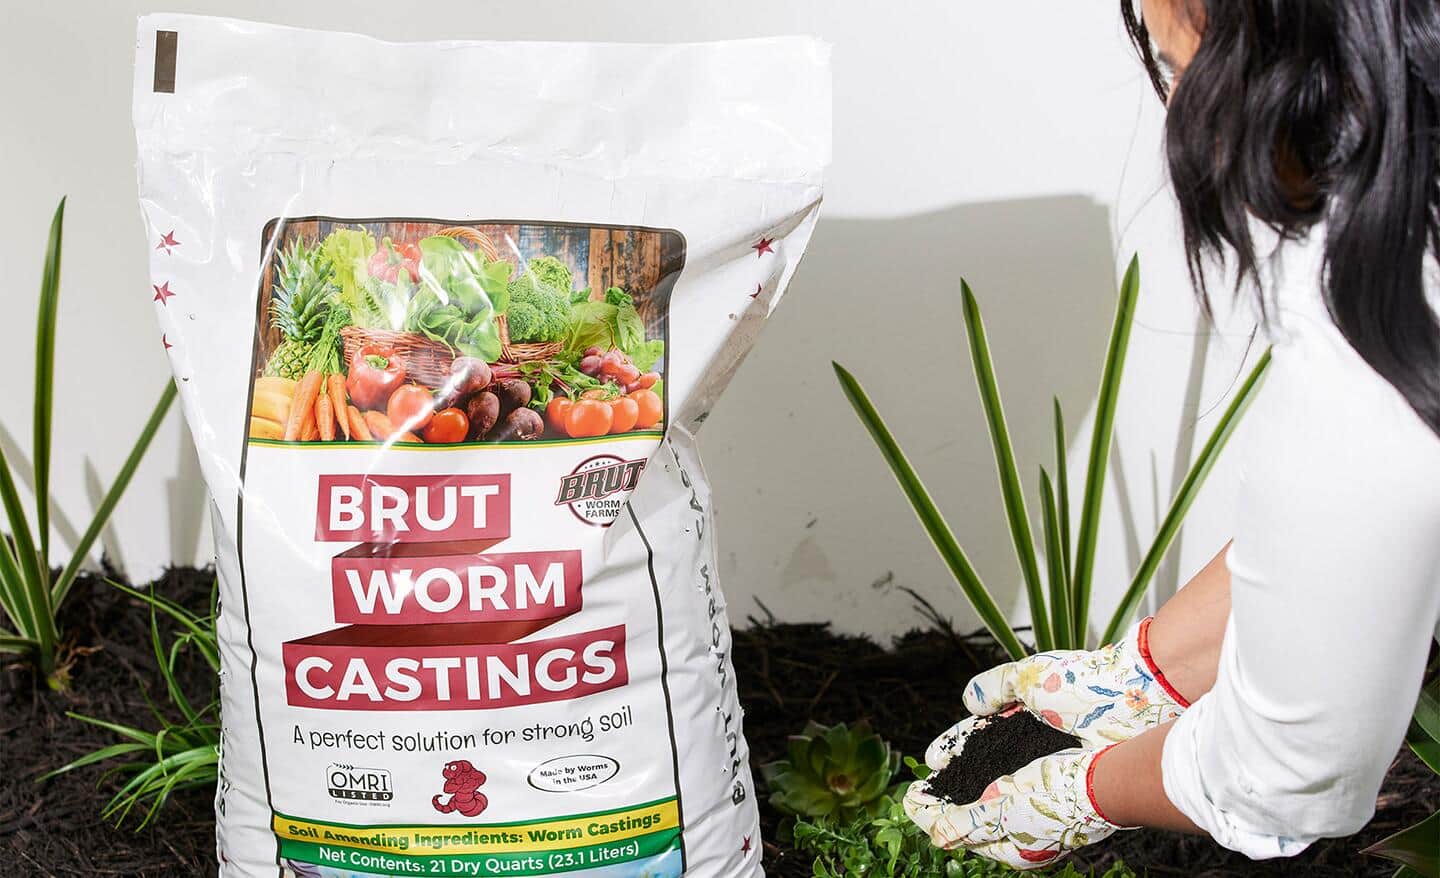 A person next to a bag of worm castings adds soil amendments into a garden.